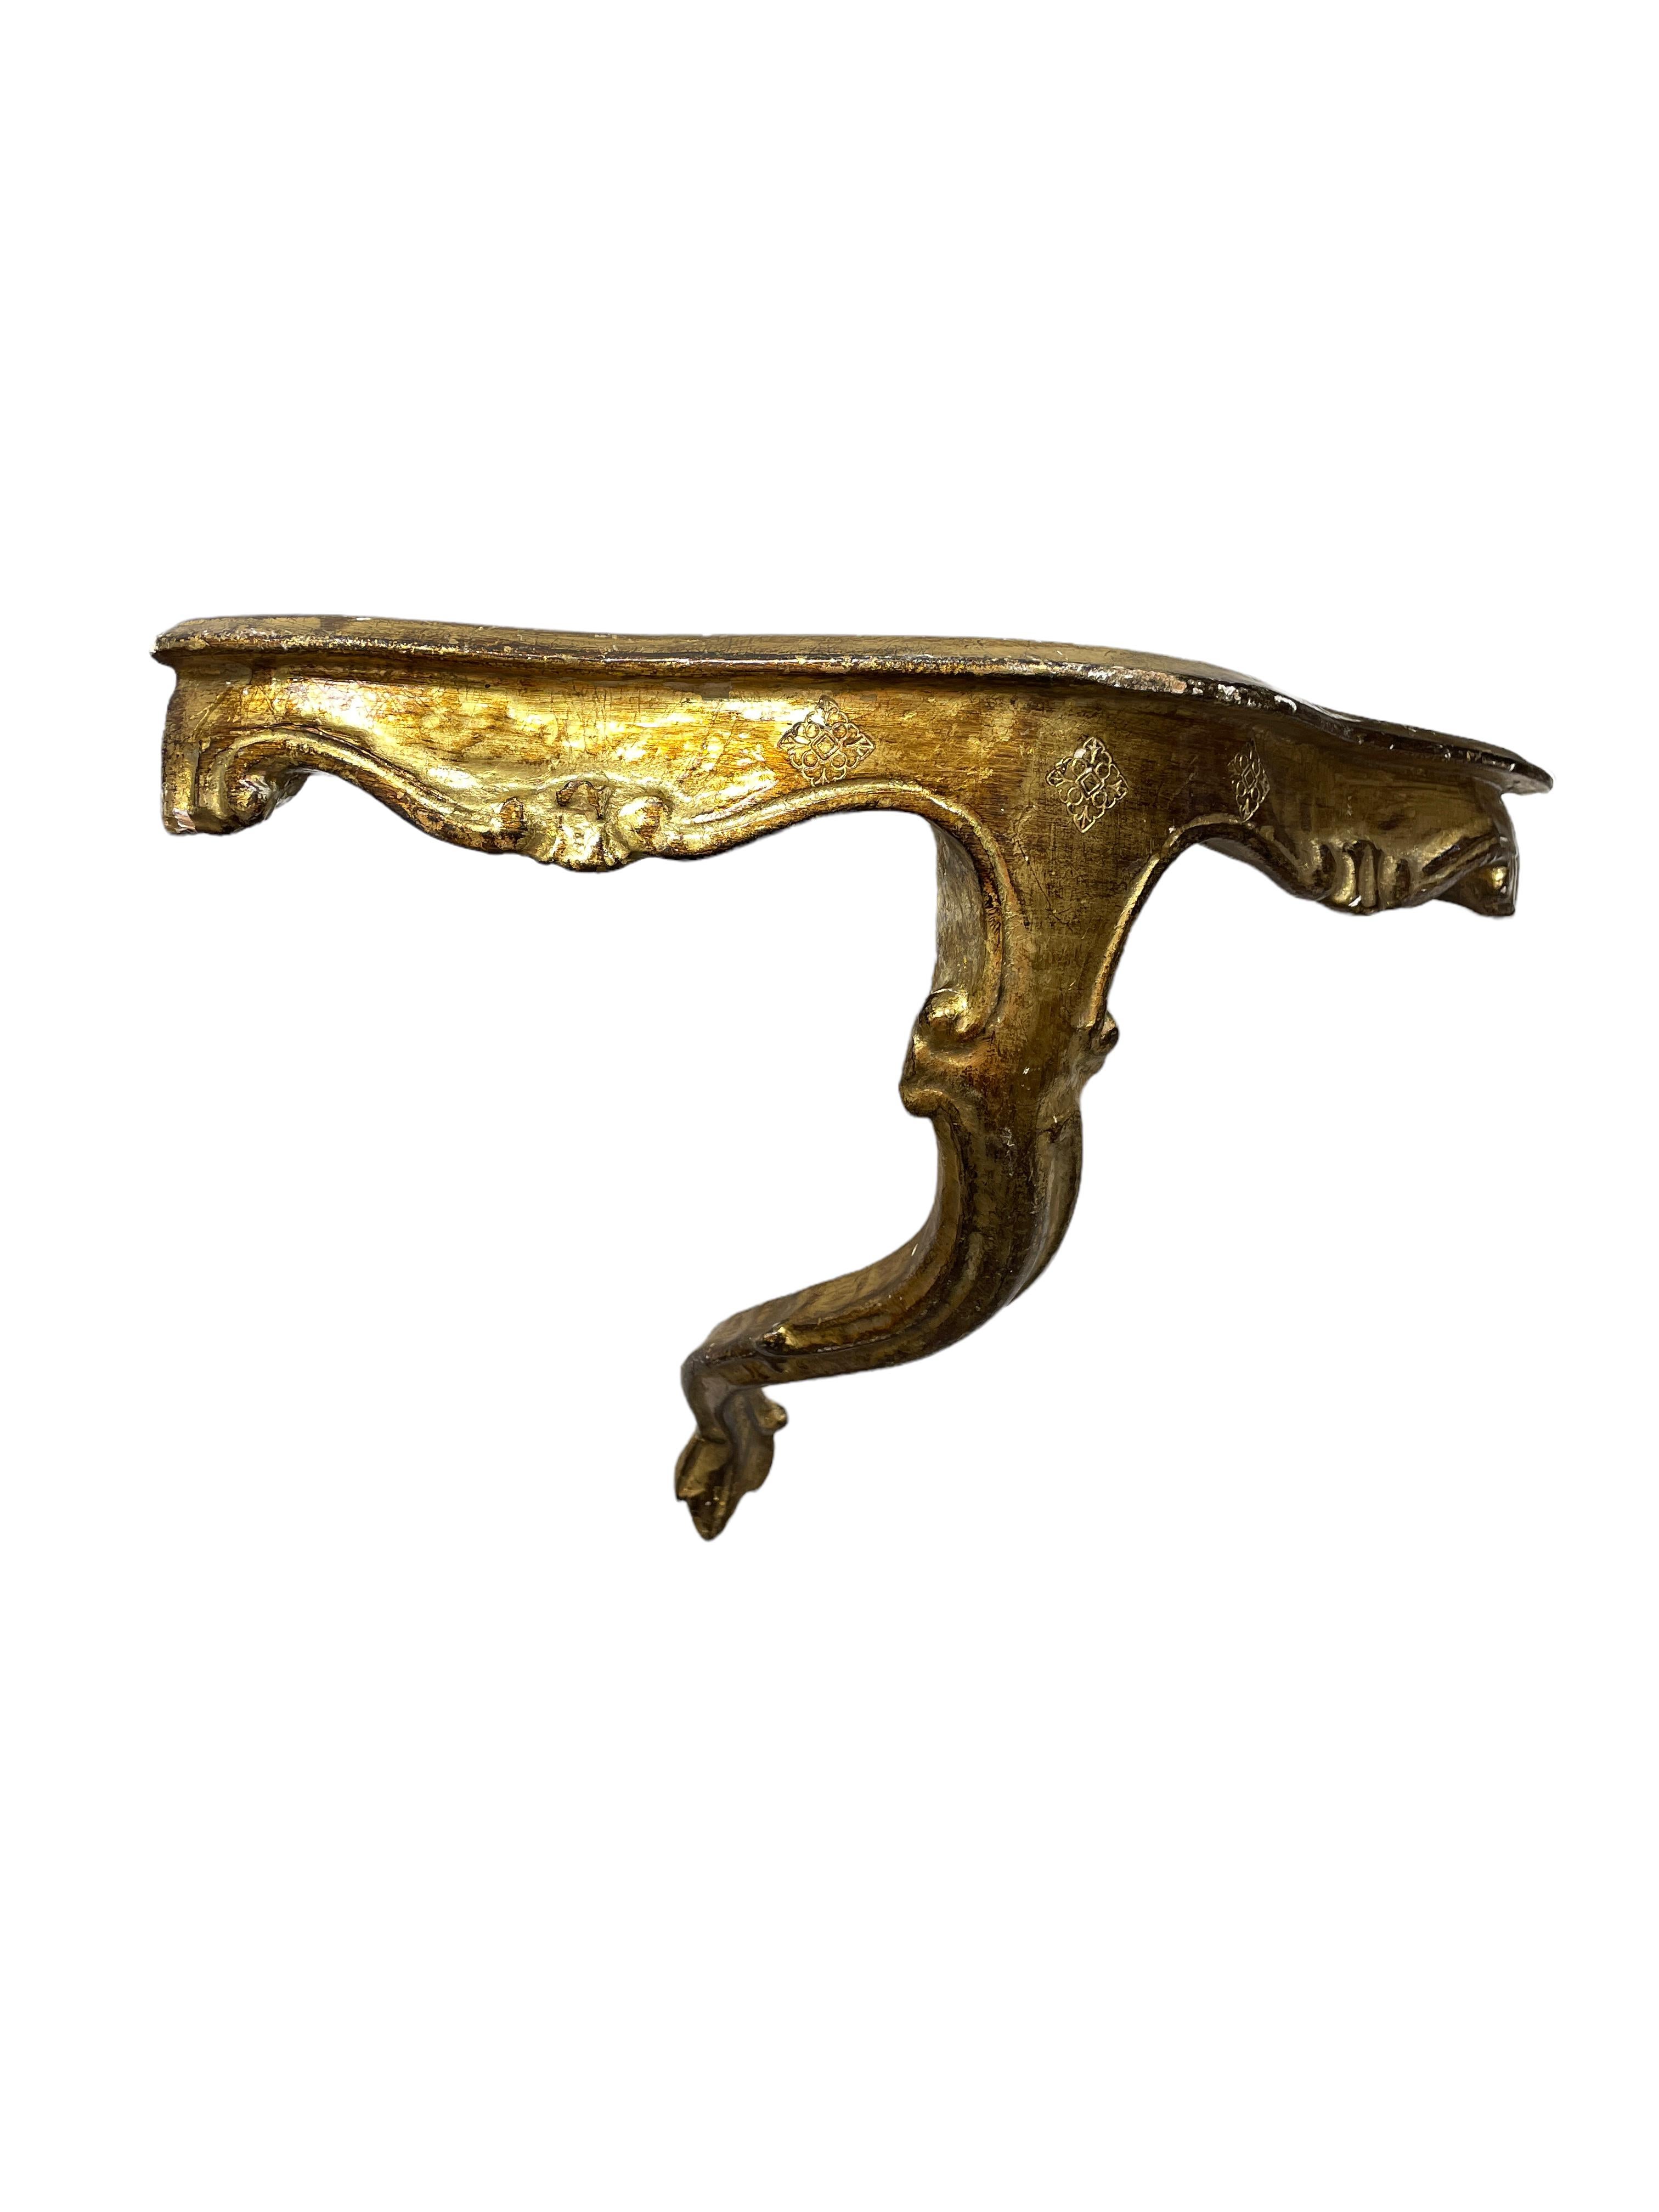 Vintage Florence Wall Corner Shelf Console, Gilded Carved Wood, Florentine Style For Sale 9